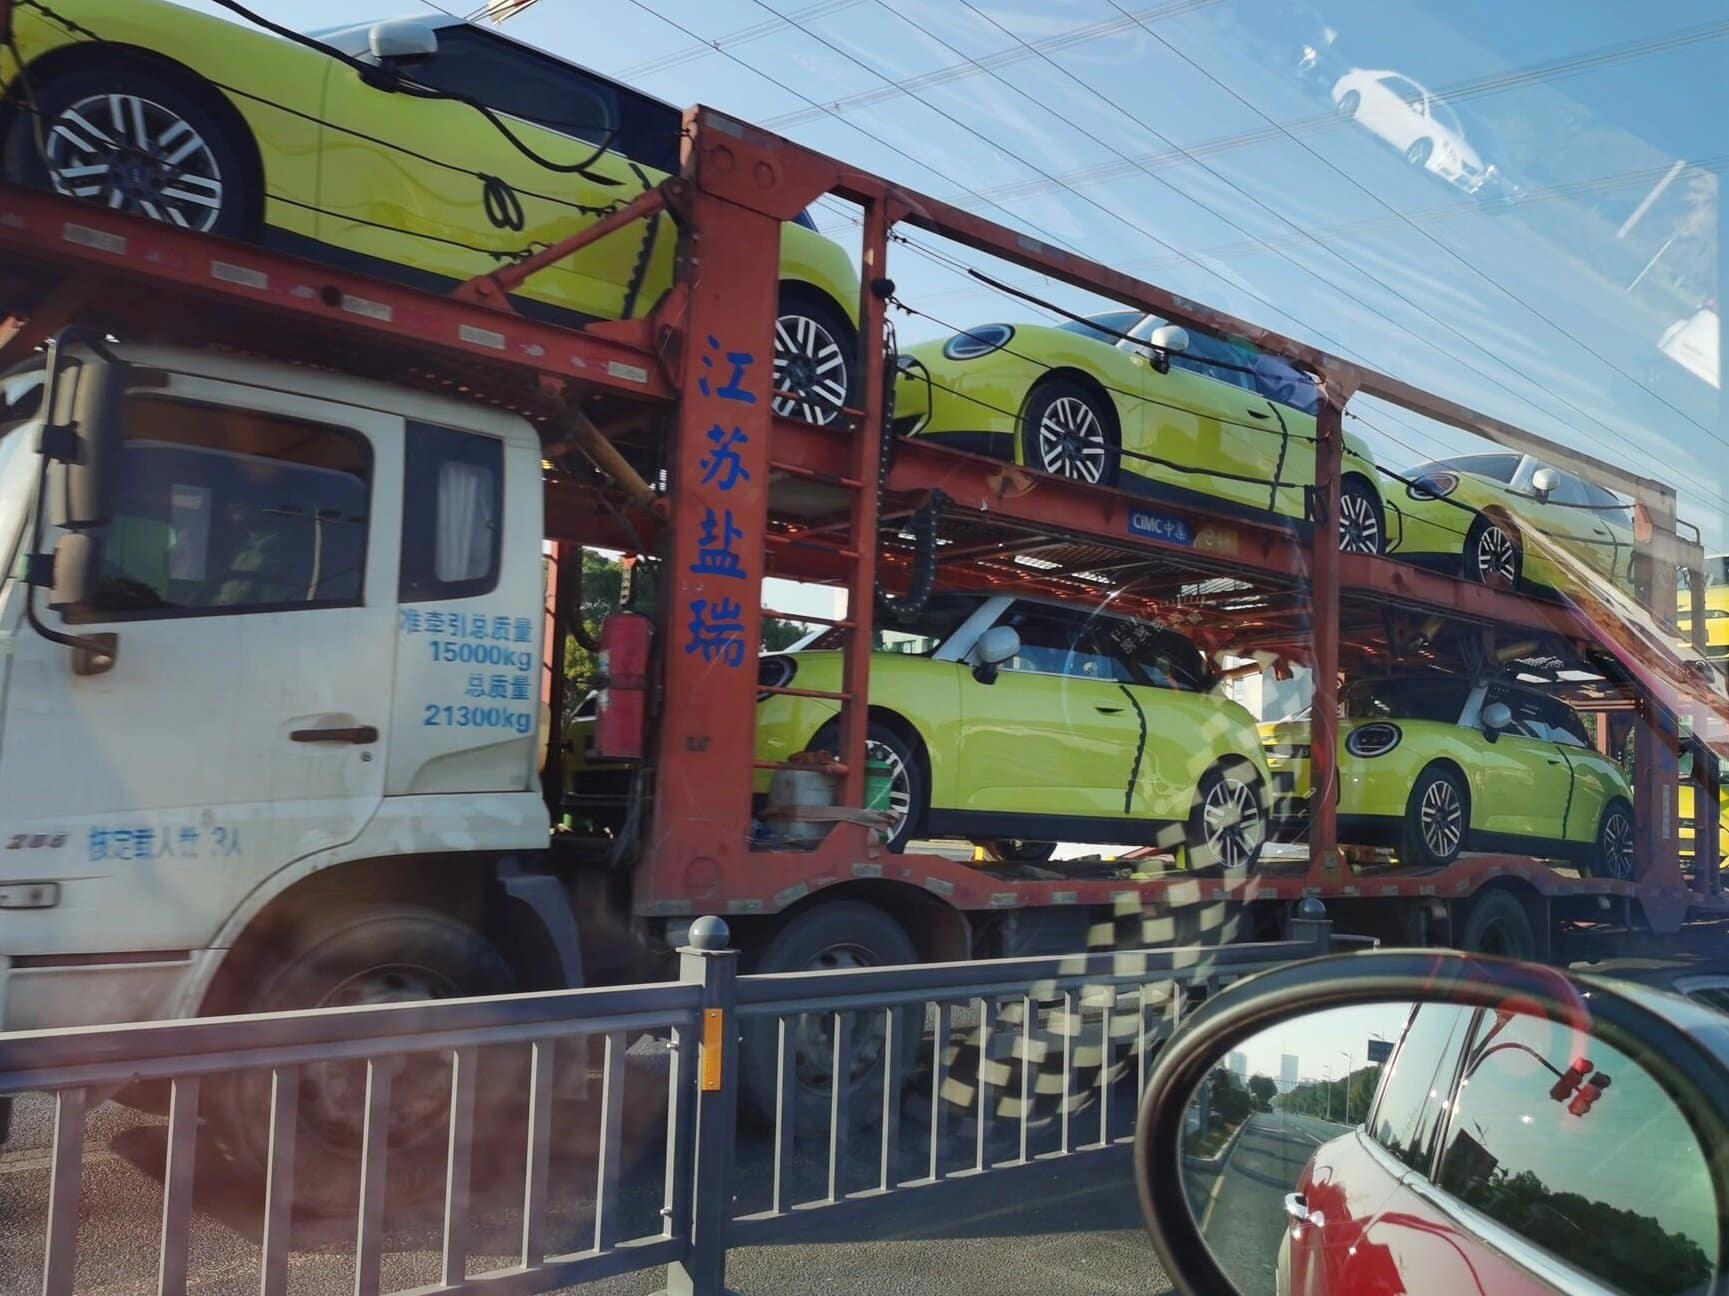 New Mini Cooper Electric spotted on trailer in China ahead of